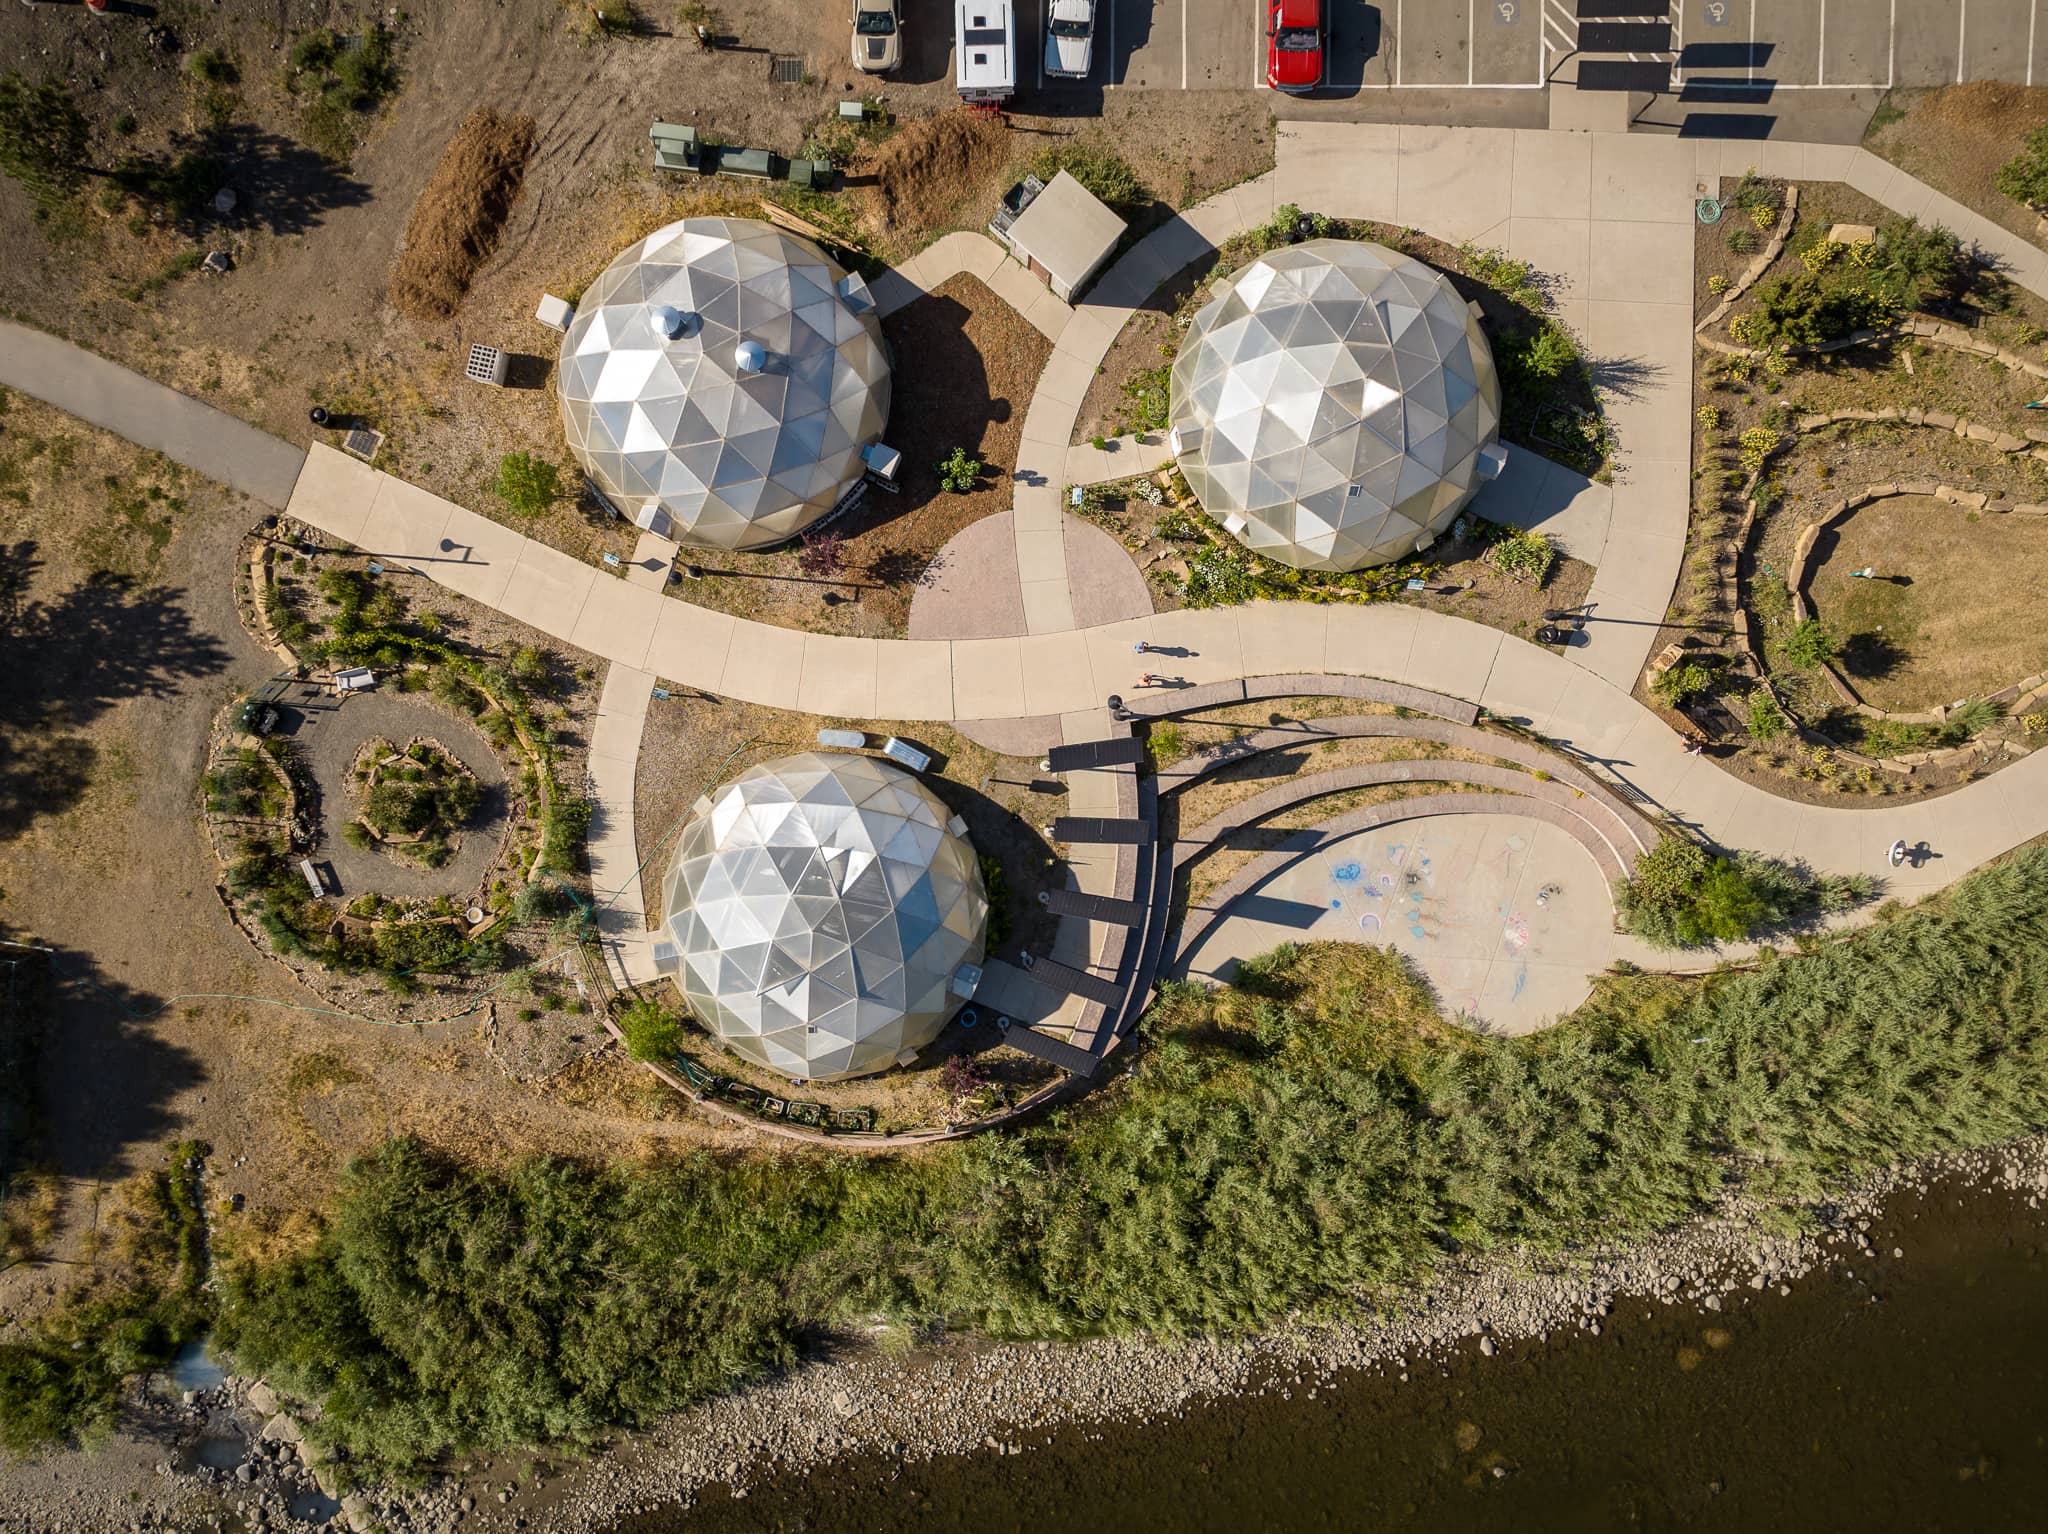 Drone View of Geothermal Domes and Park Showing the Manicured Terrain